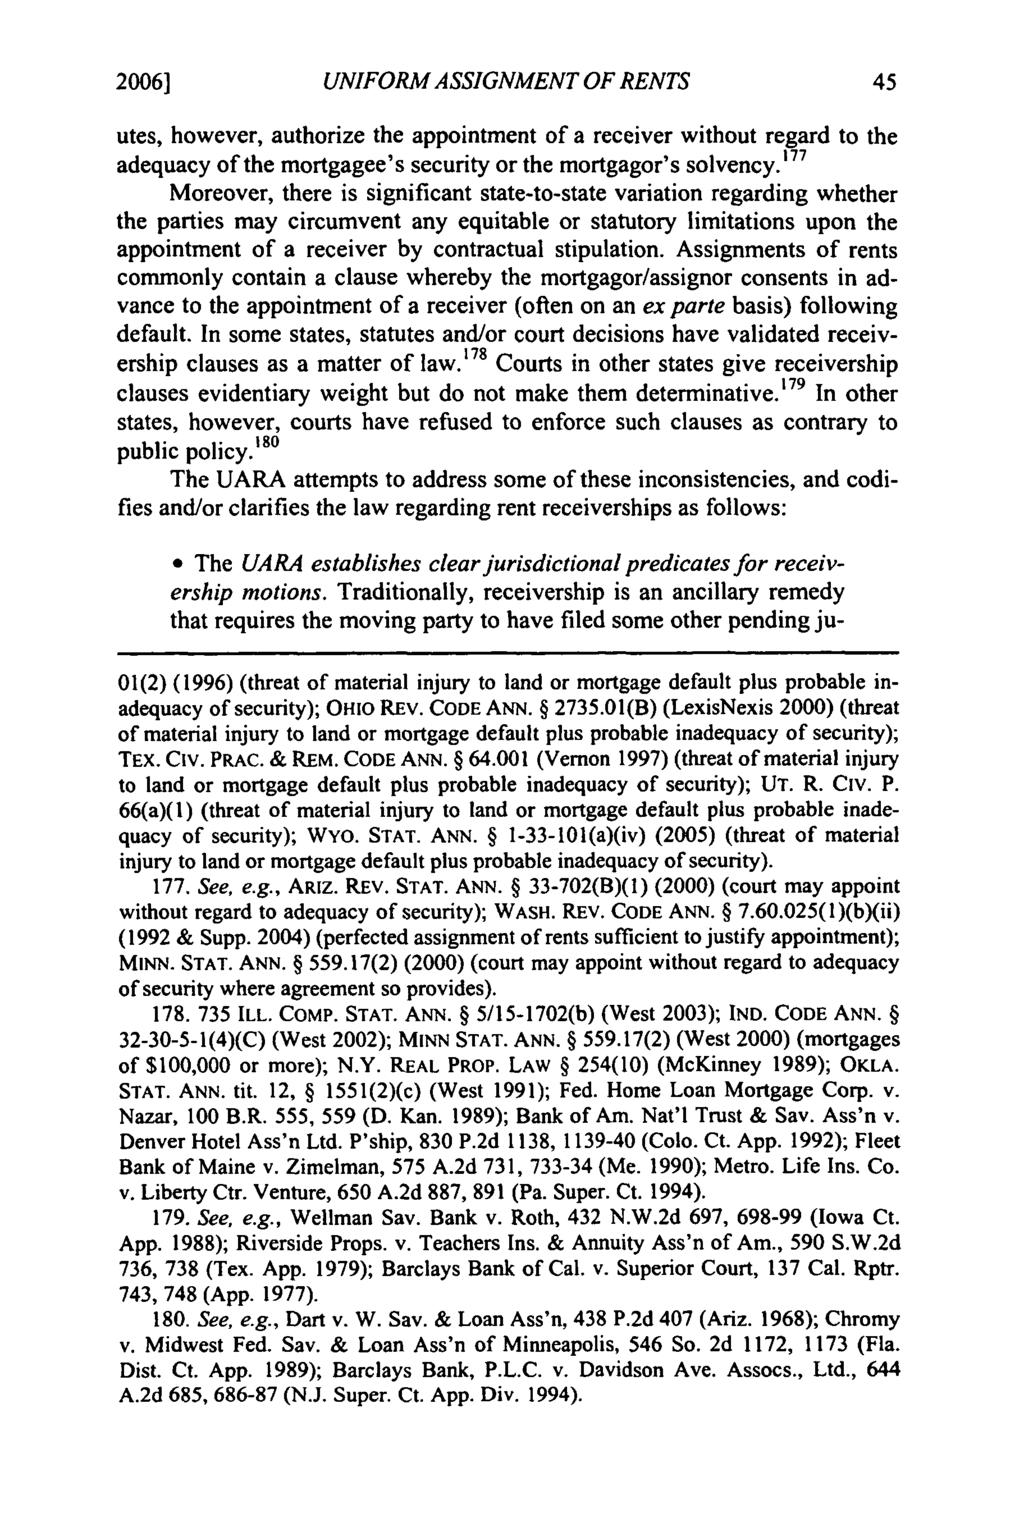 20061 Freyermuth: Freyermuth: Modernizing Security in Rents UNIFORM ASSIGNMENT OF RENTS utes, however, authorize the appointment of a receiver without regard to the adequacy of the mortgagee's